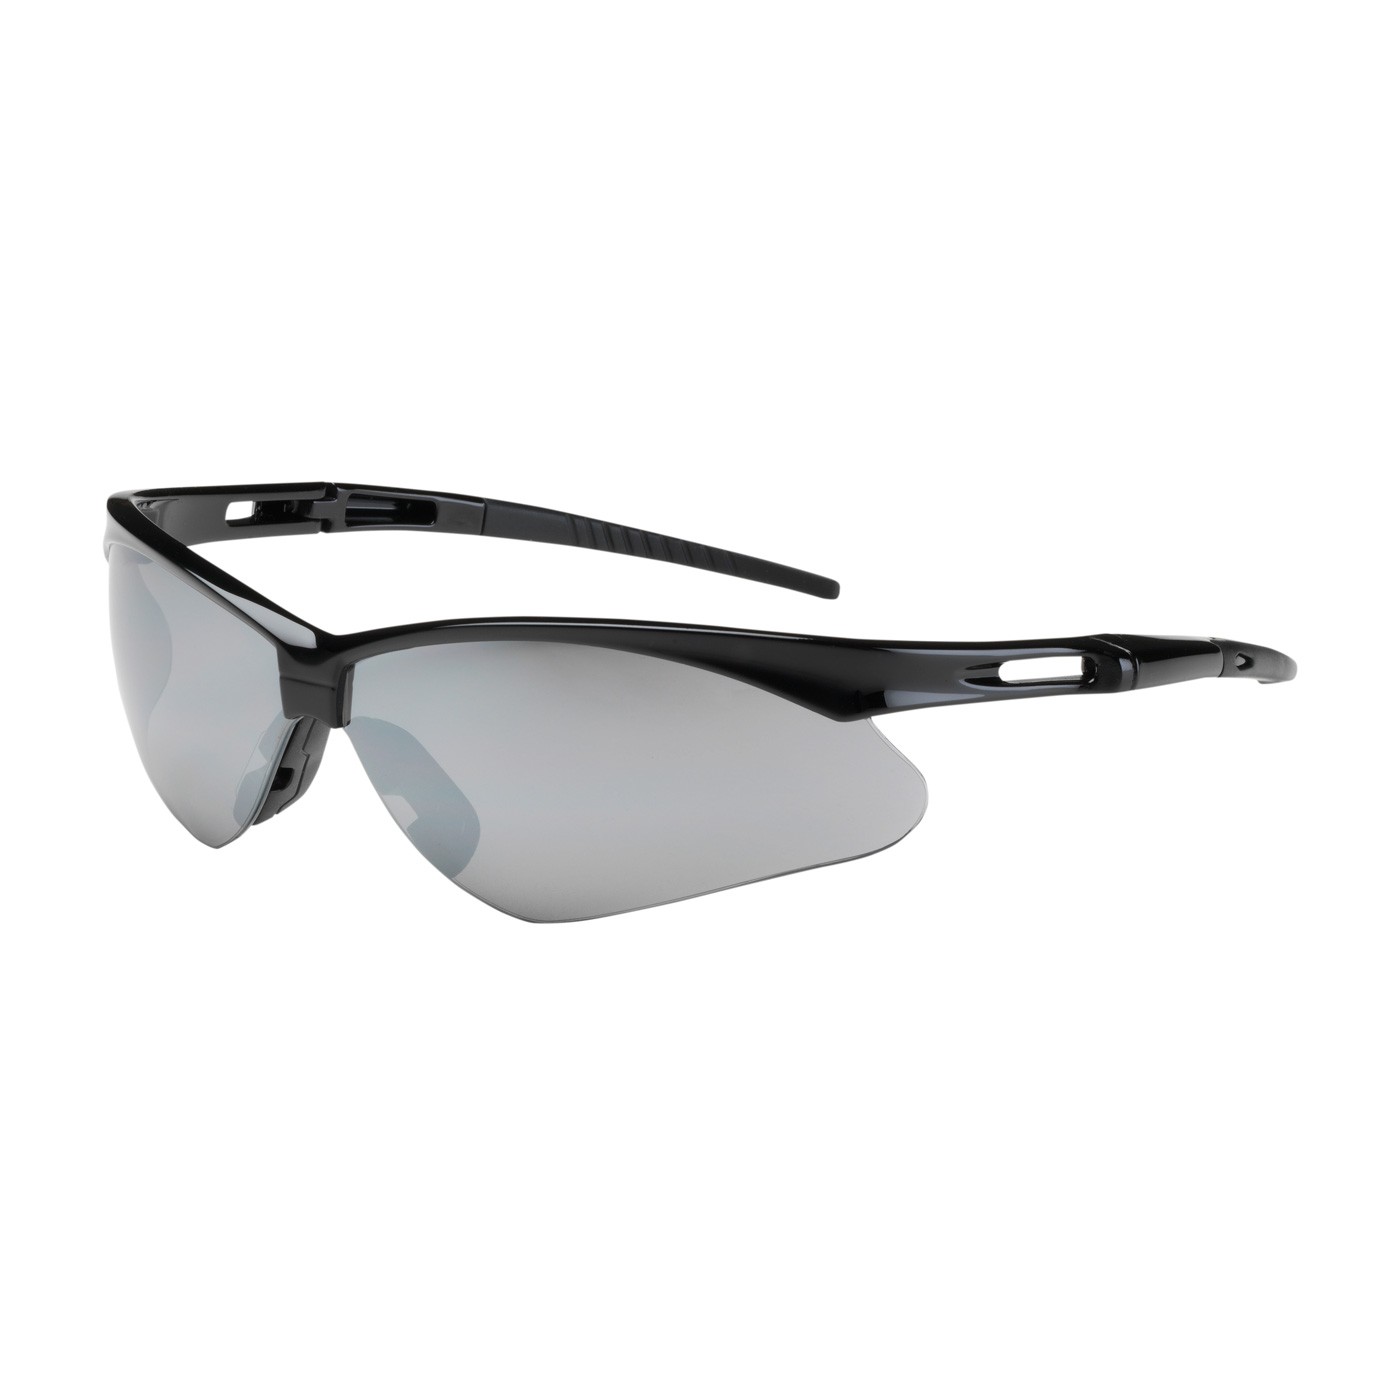 Anser™ Semi-Rimless Safety Glasses with Black Frame, Gray Lens and Anti-Scratch / Anti-Fog Coating  (#250-AN-10126)